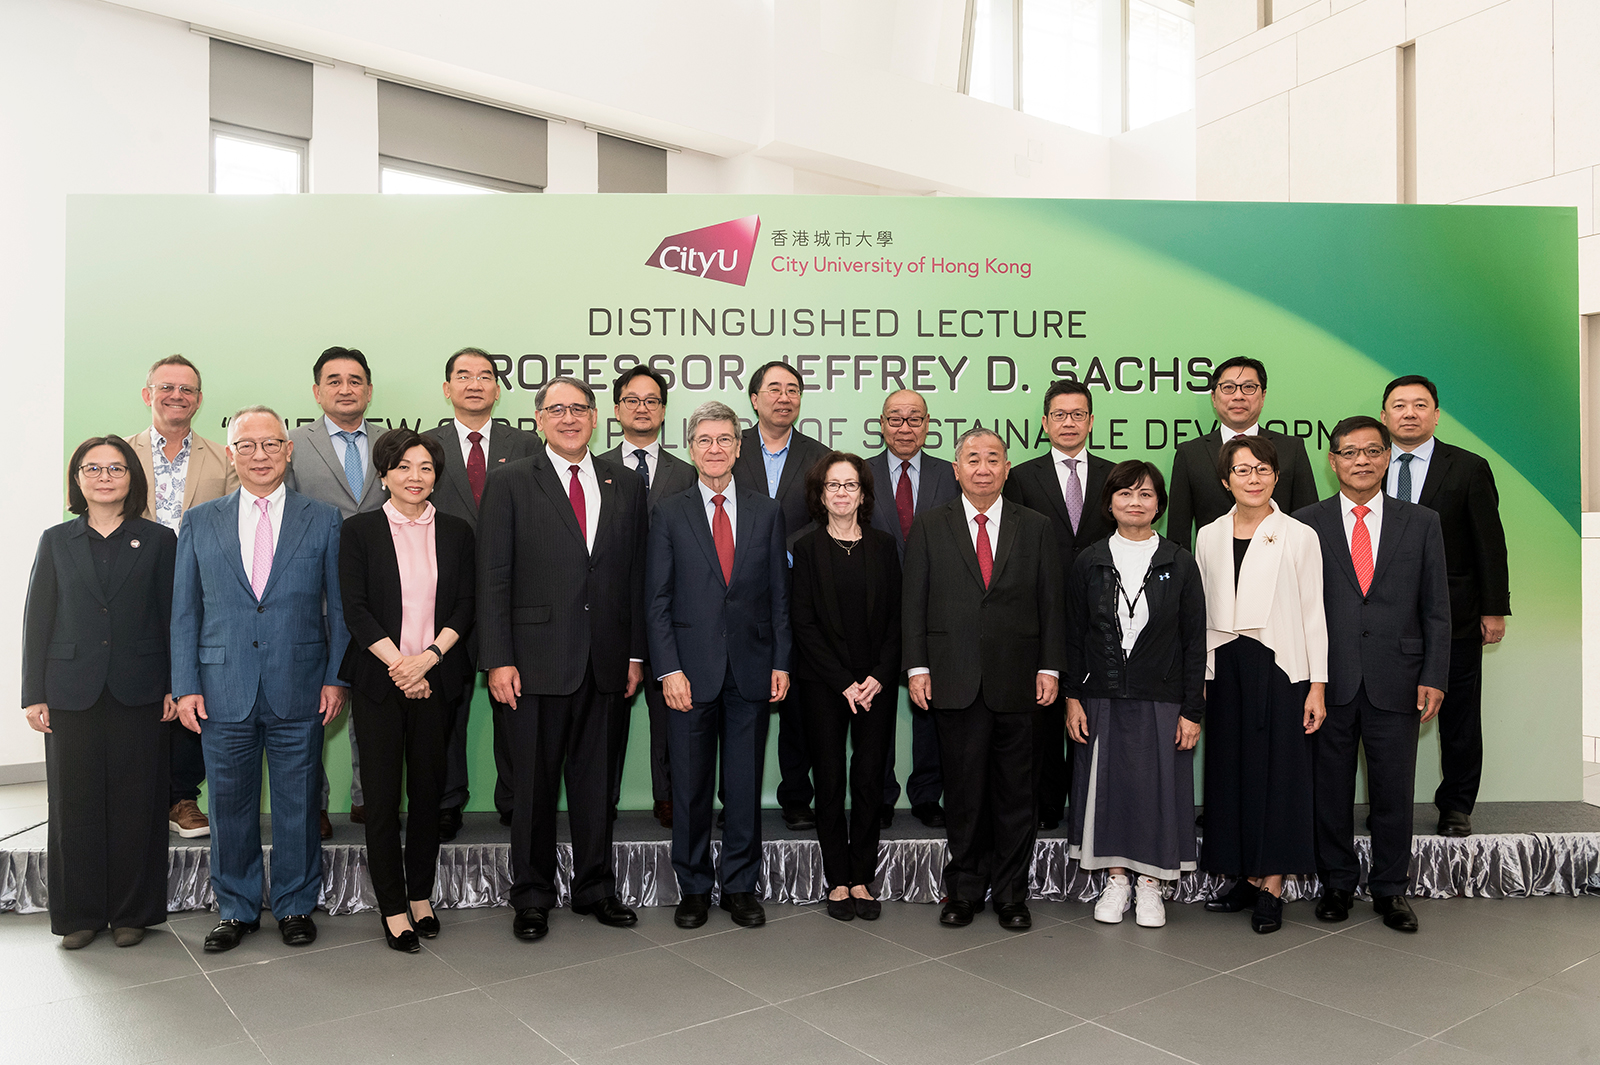 Mr Lester Garson Huang (forth from left, front row), Council Chairman of CityU, President Freddy Boey Yin Chiang (forth from right, front row) and guests take photo with Professor and Mrs Sachs (fifth and sixth from left, front row).